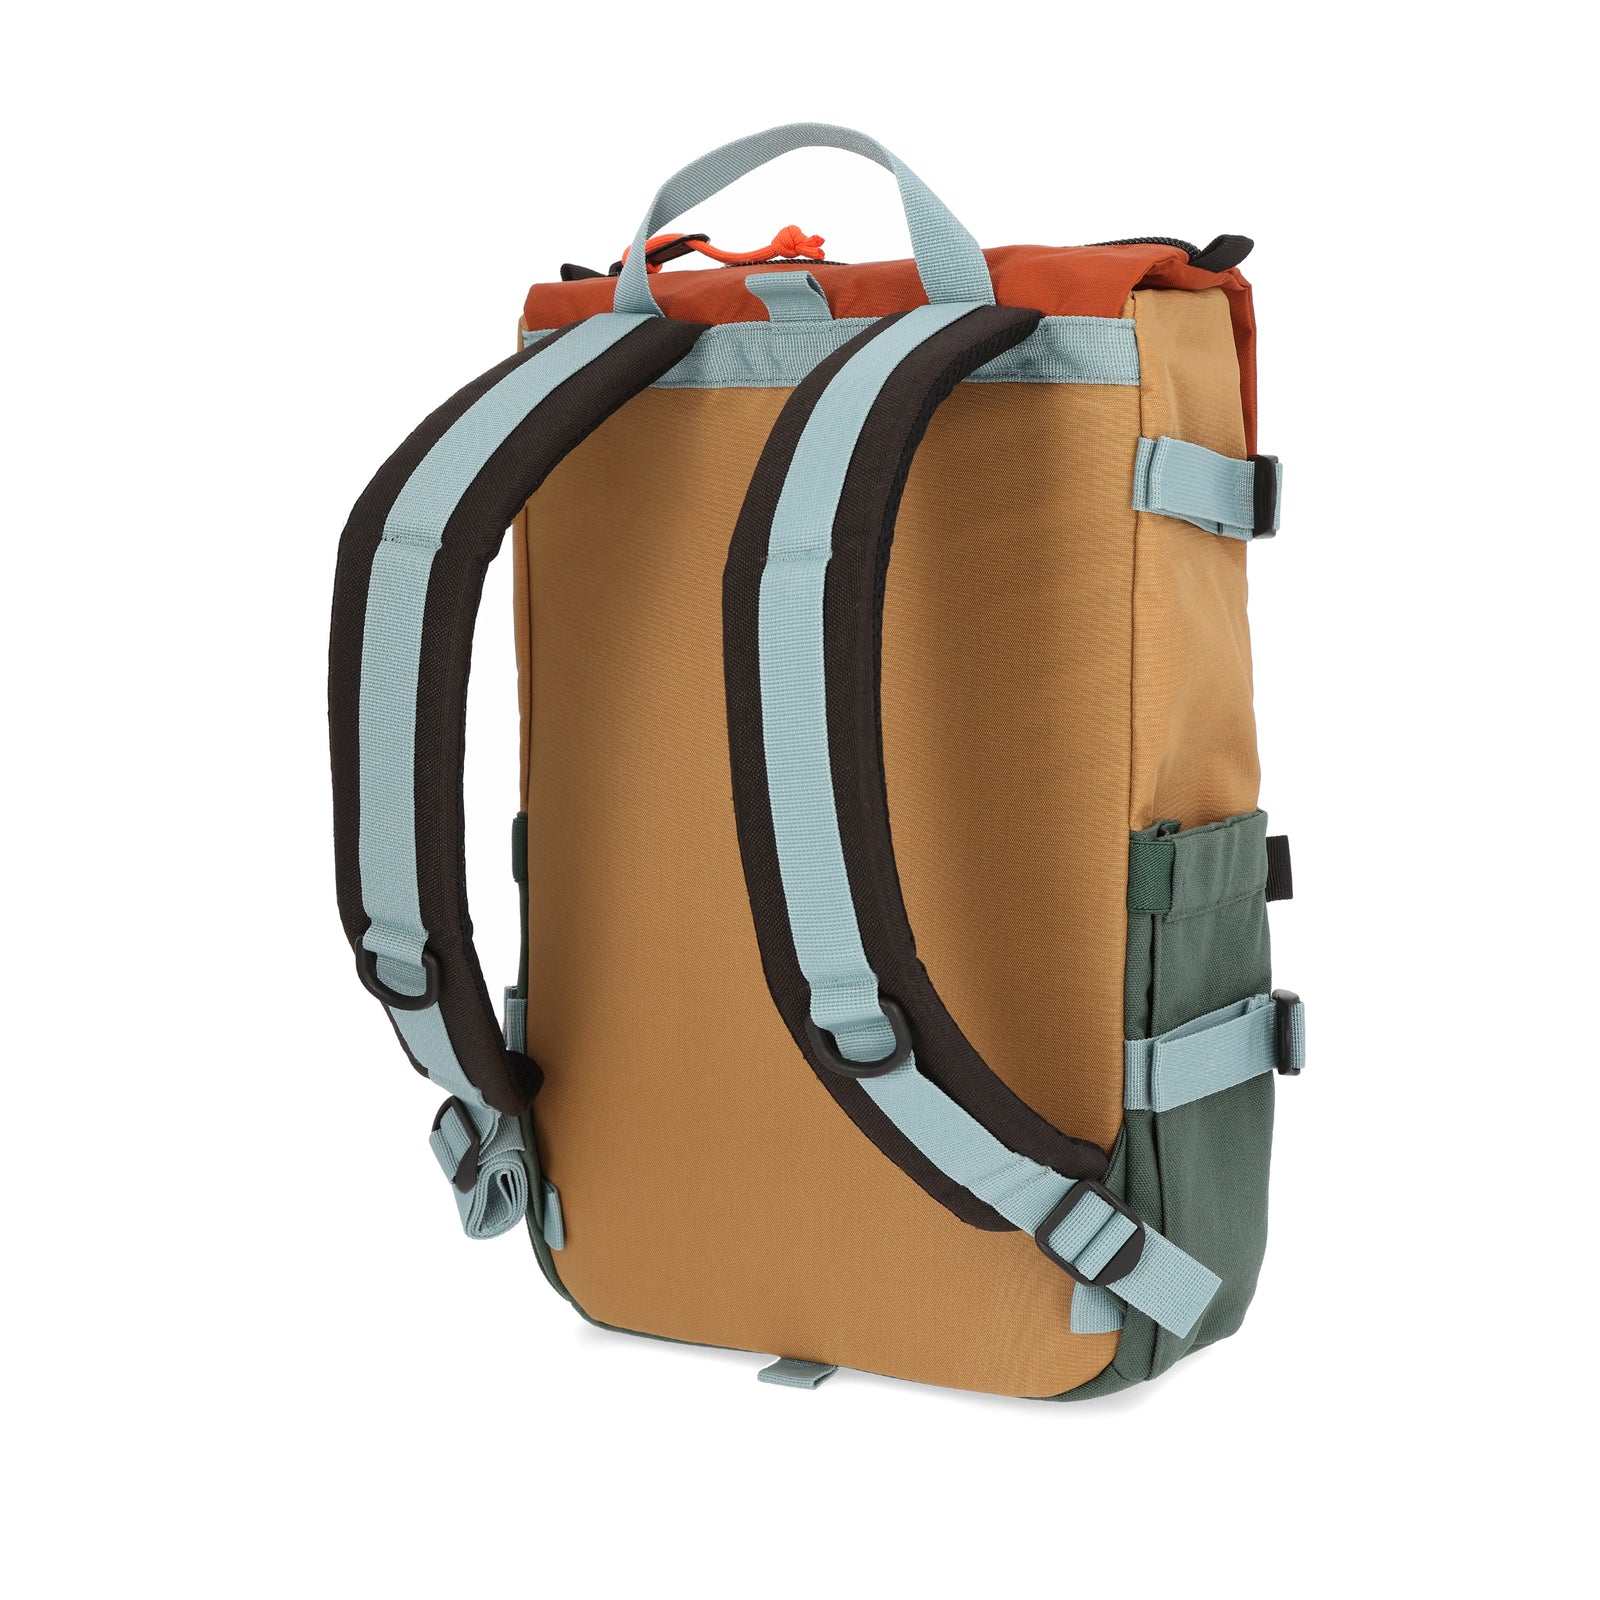 Topo Designs Rover Pack Classic laptop backpack in "Forest / Khaki".